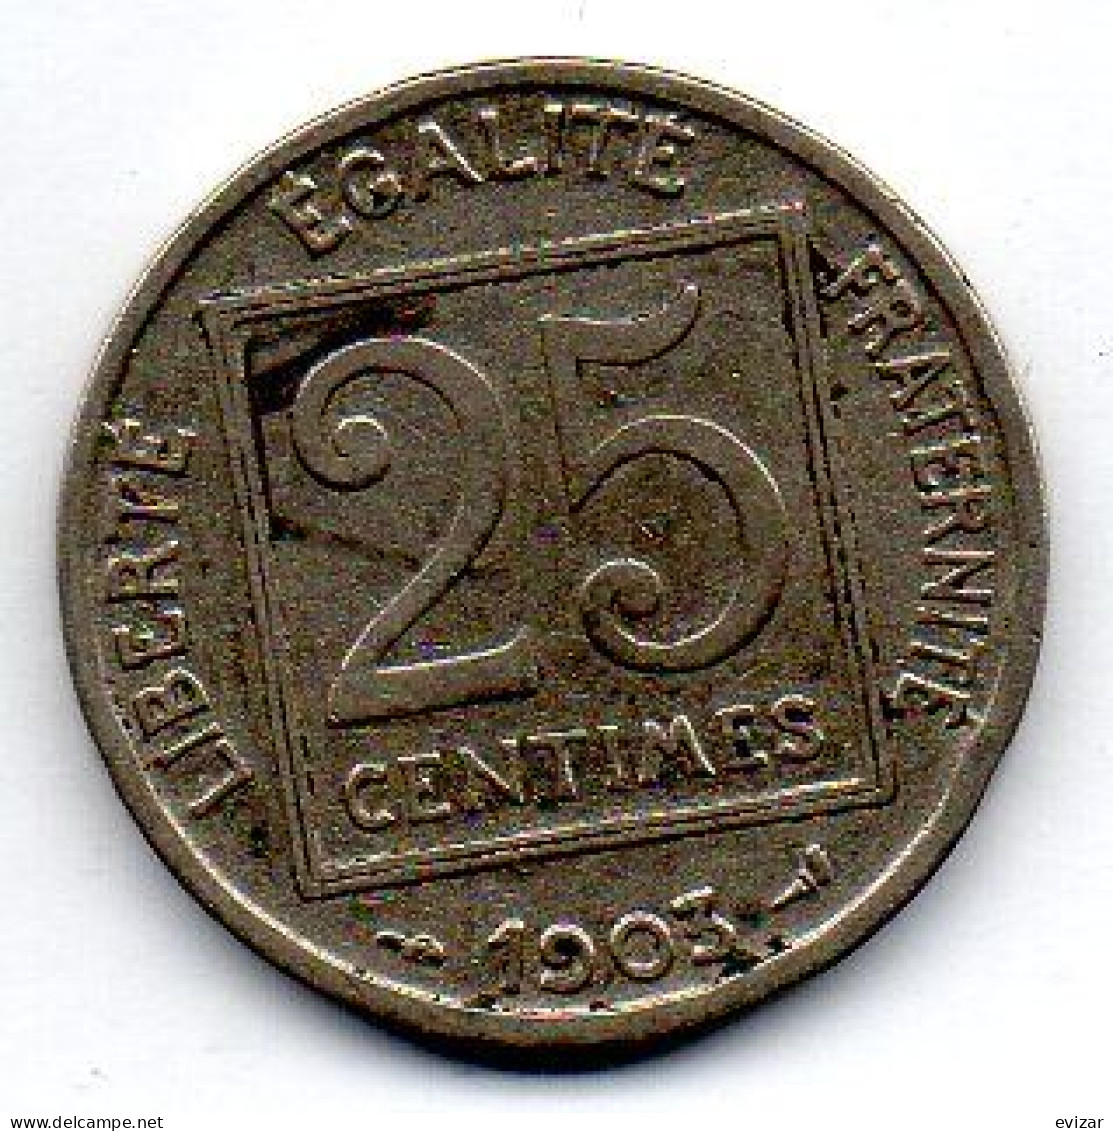 FRANCE, 25 Centimes, Nickel, Year 1903, KM # 855 - 25 Centimes